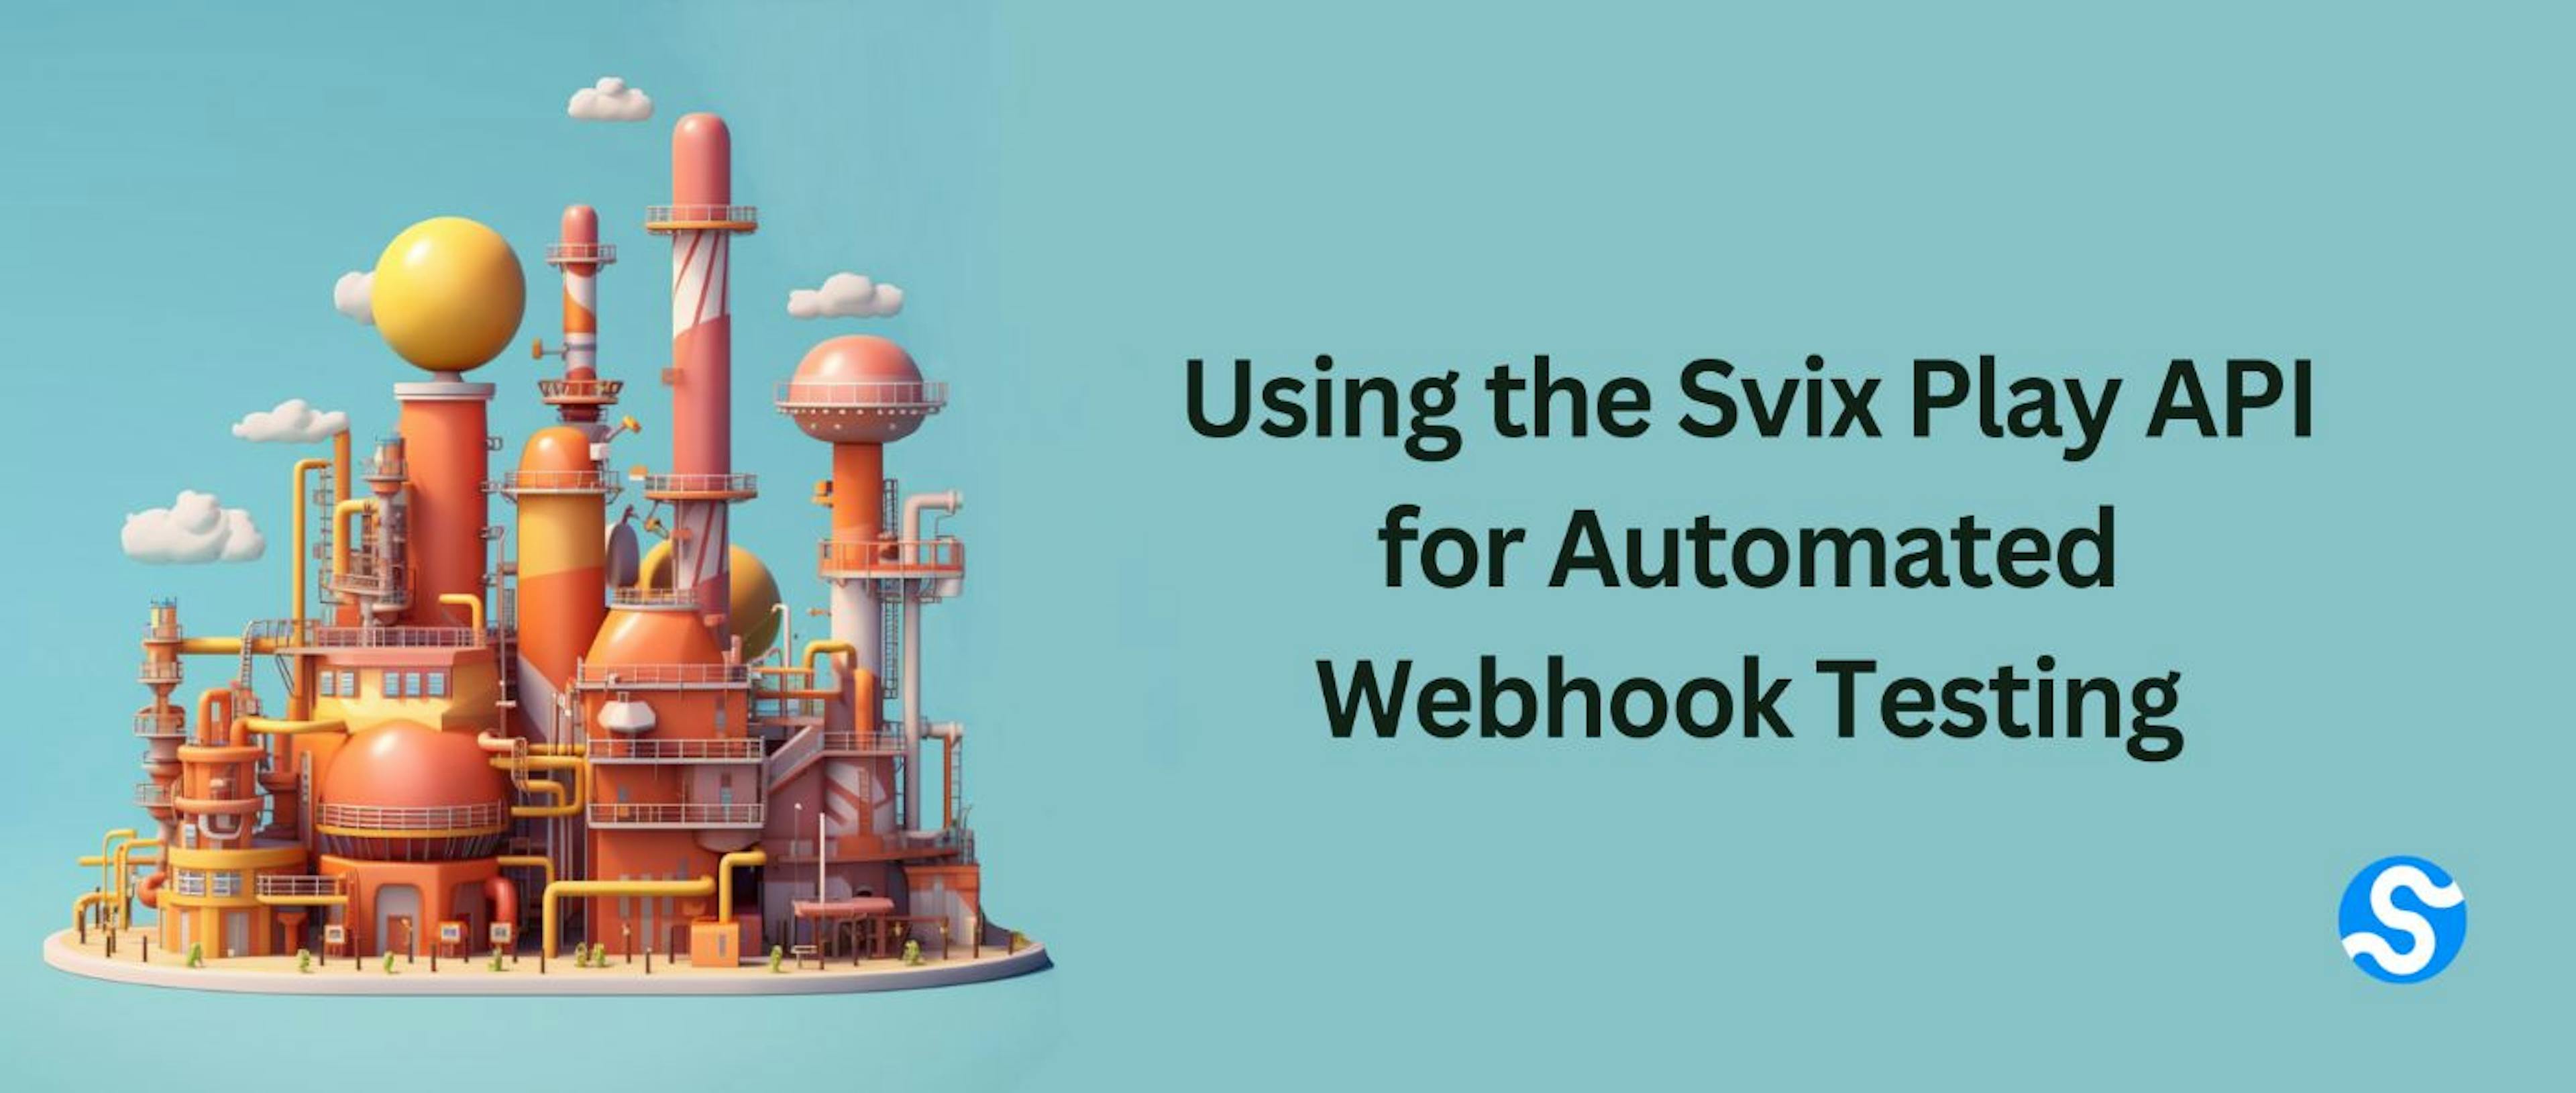 featured image - How to Use the Svix Play API for Automated Webhook Testing